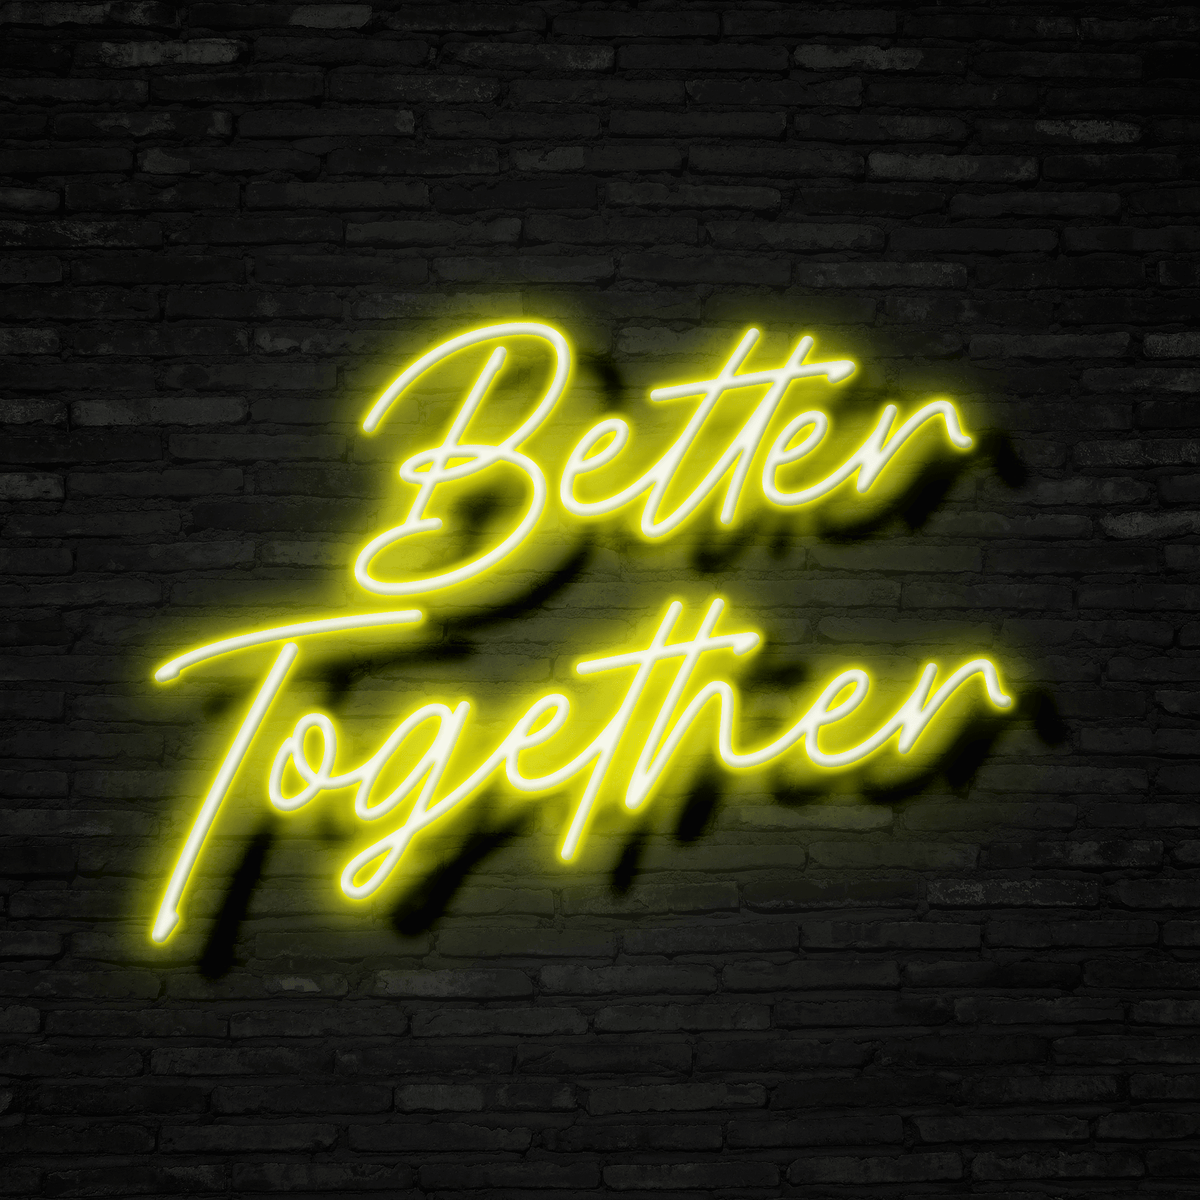 Better Together - Neon Sign